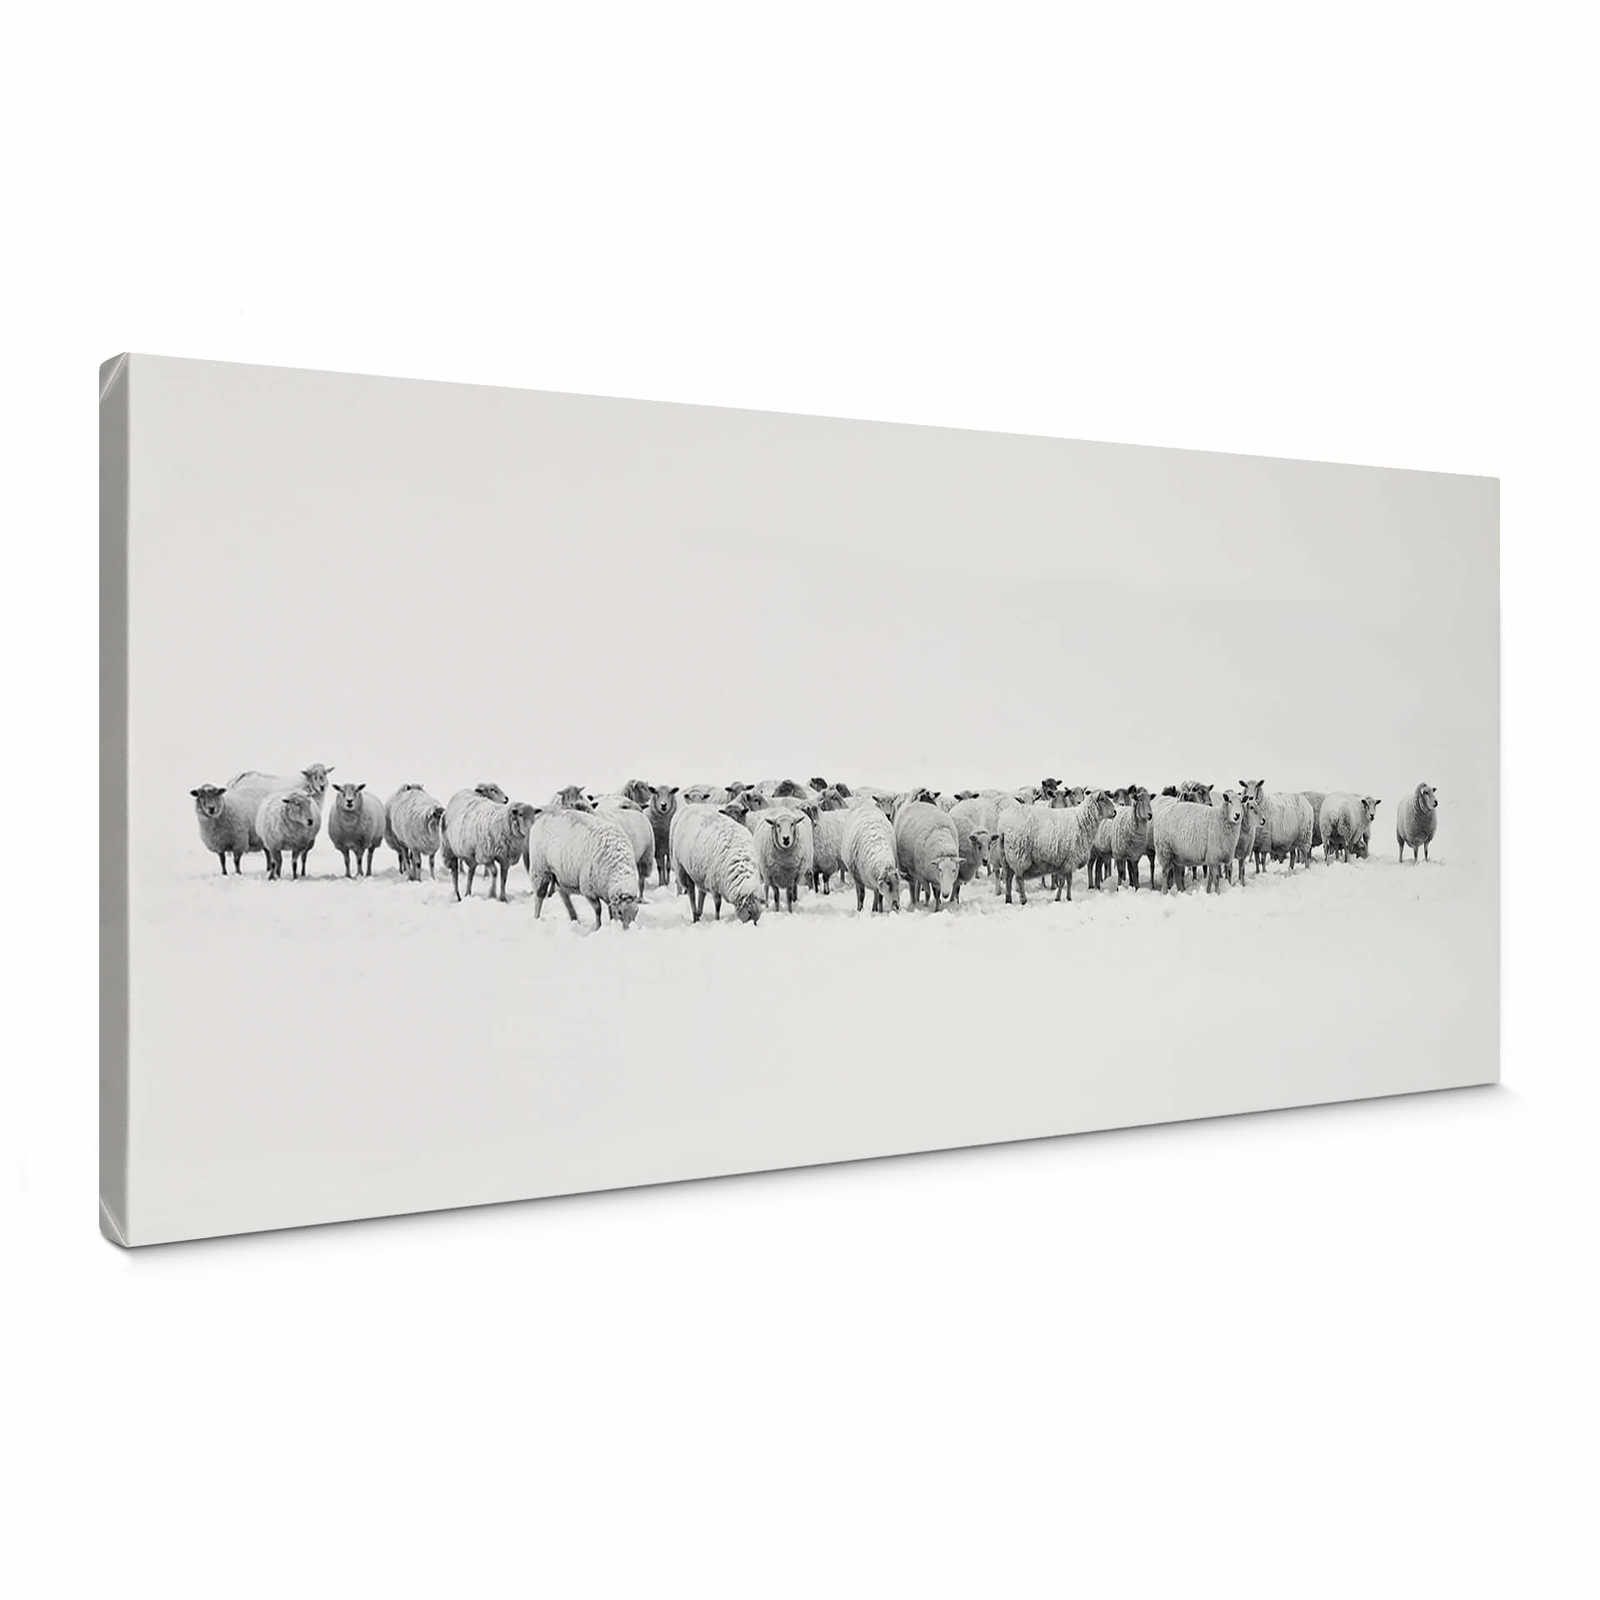         Panorama Canvas print flock of sheep – black and white
    